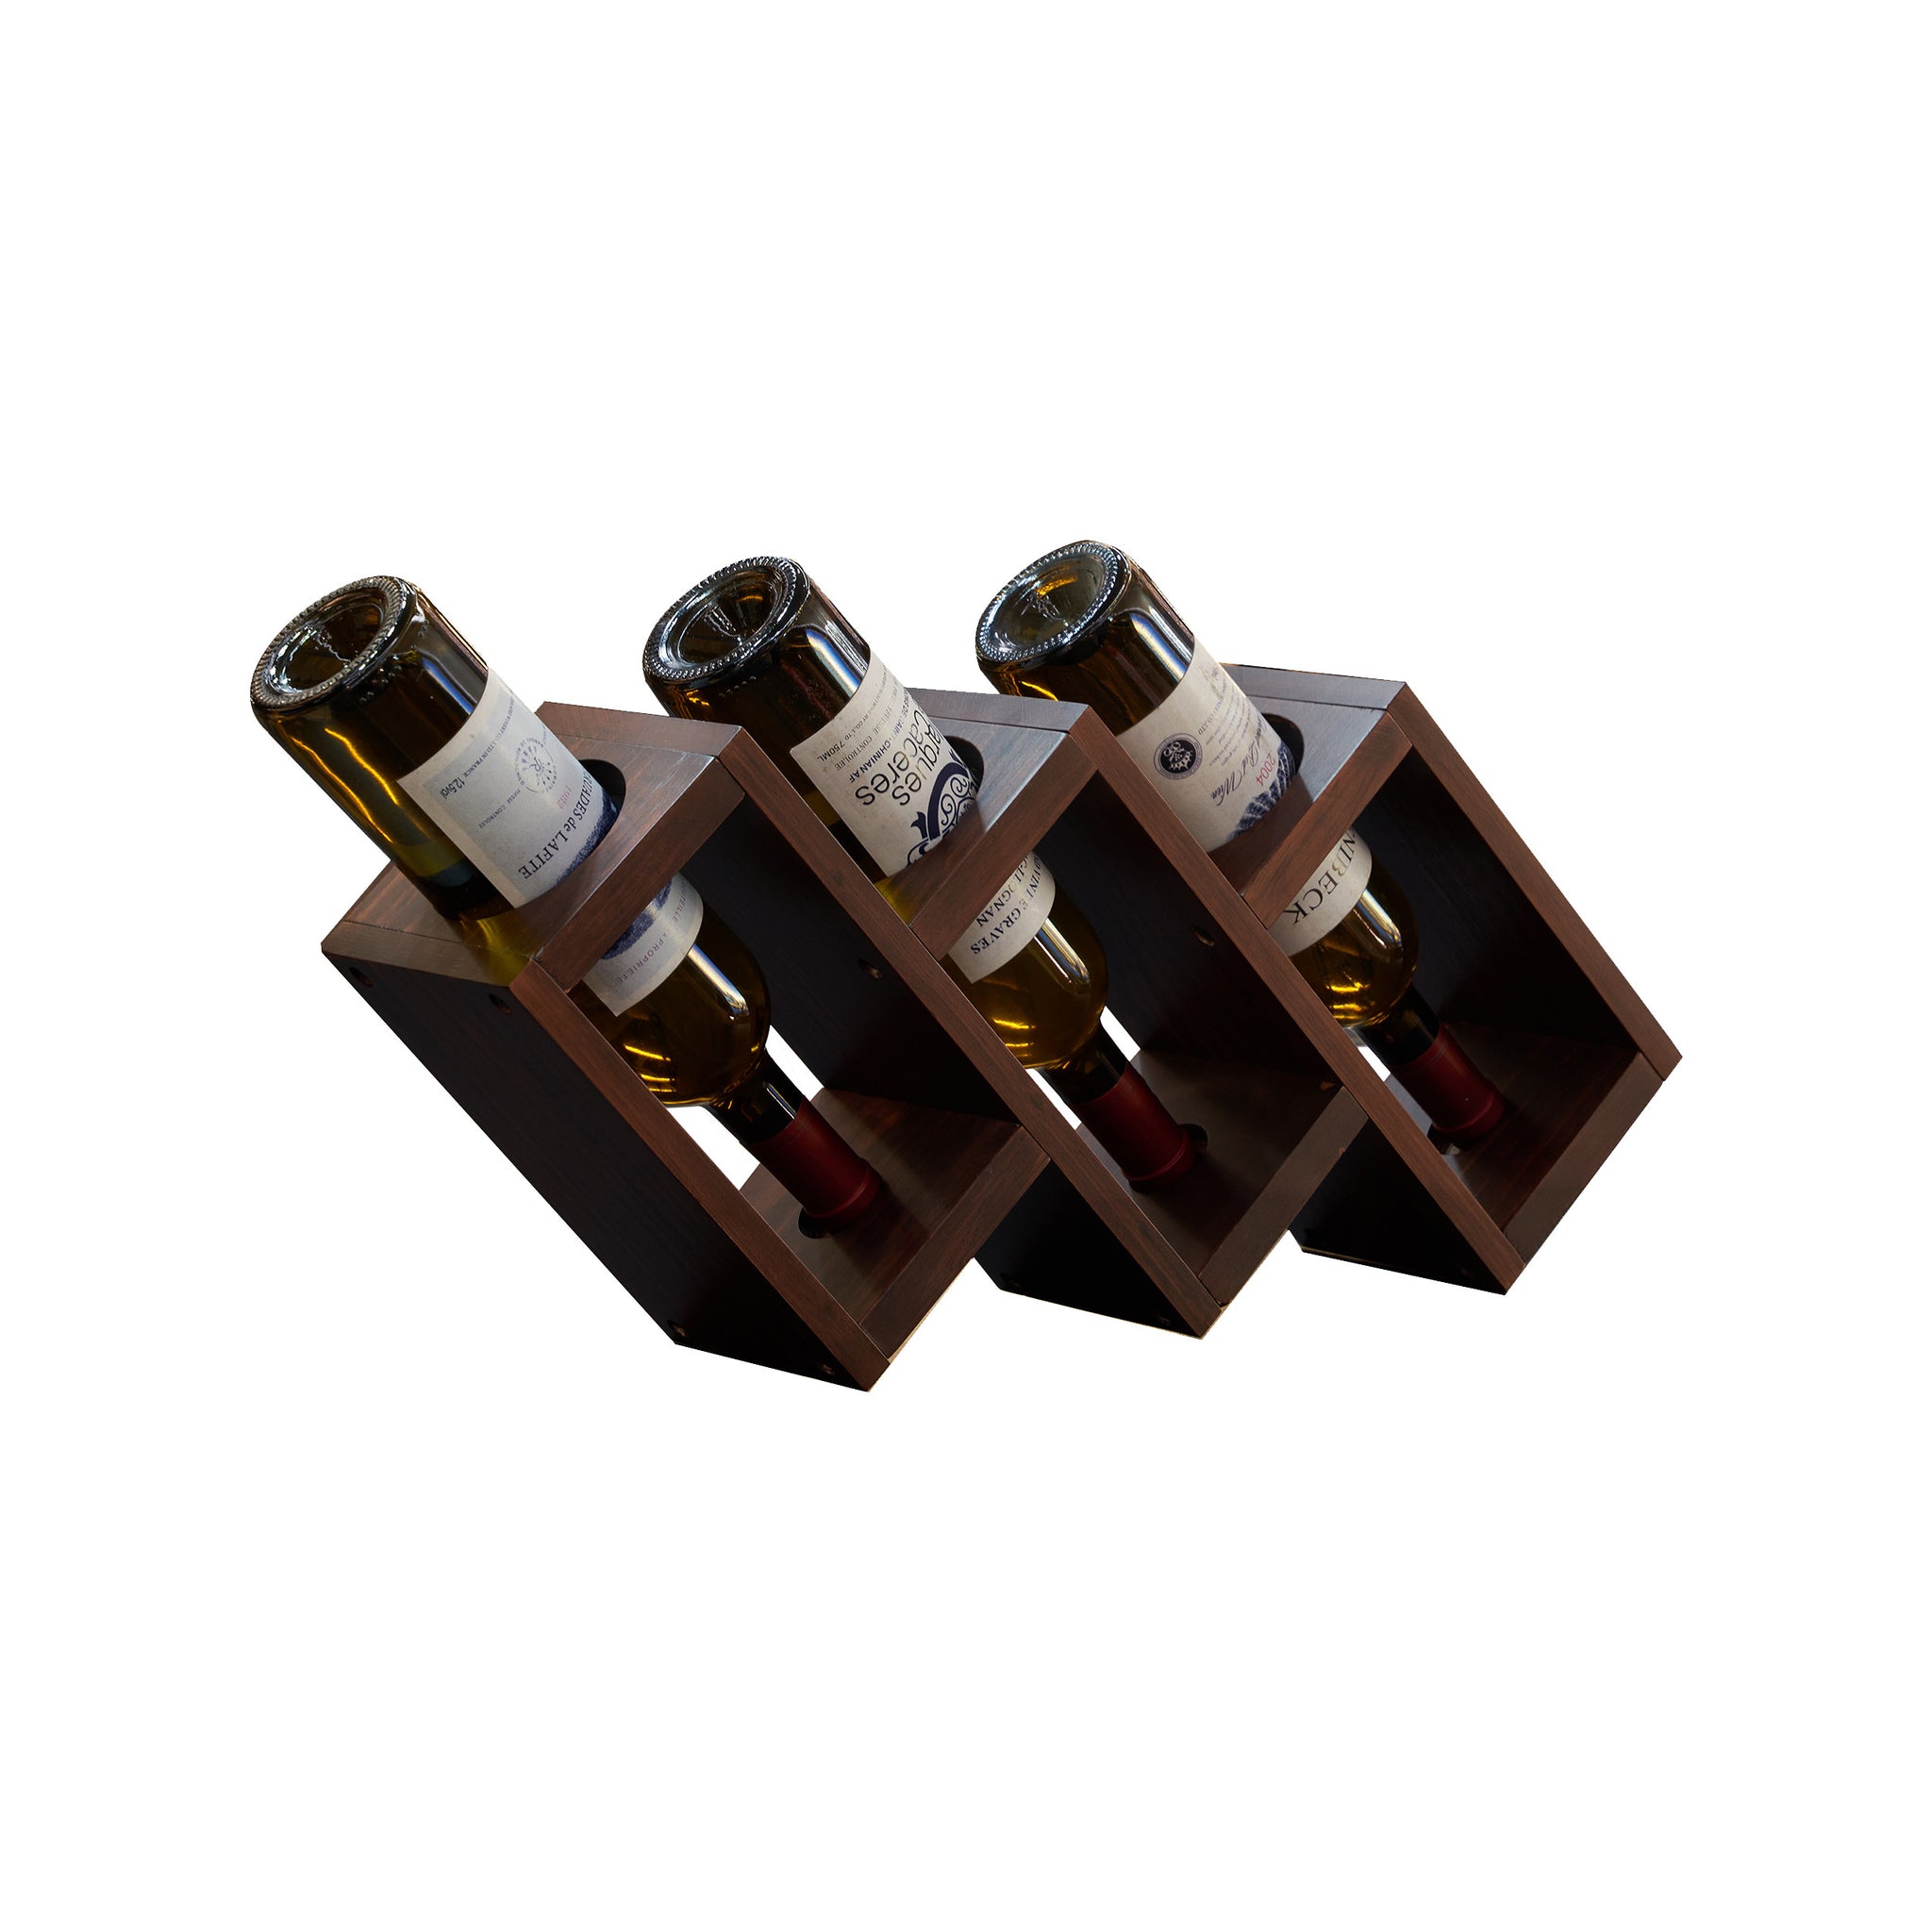 3 Bottles of Table Wine Rack Solid wood wine rack Home walnut-kitchen-american traditional-pine